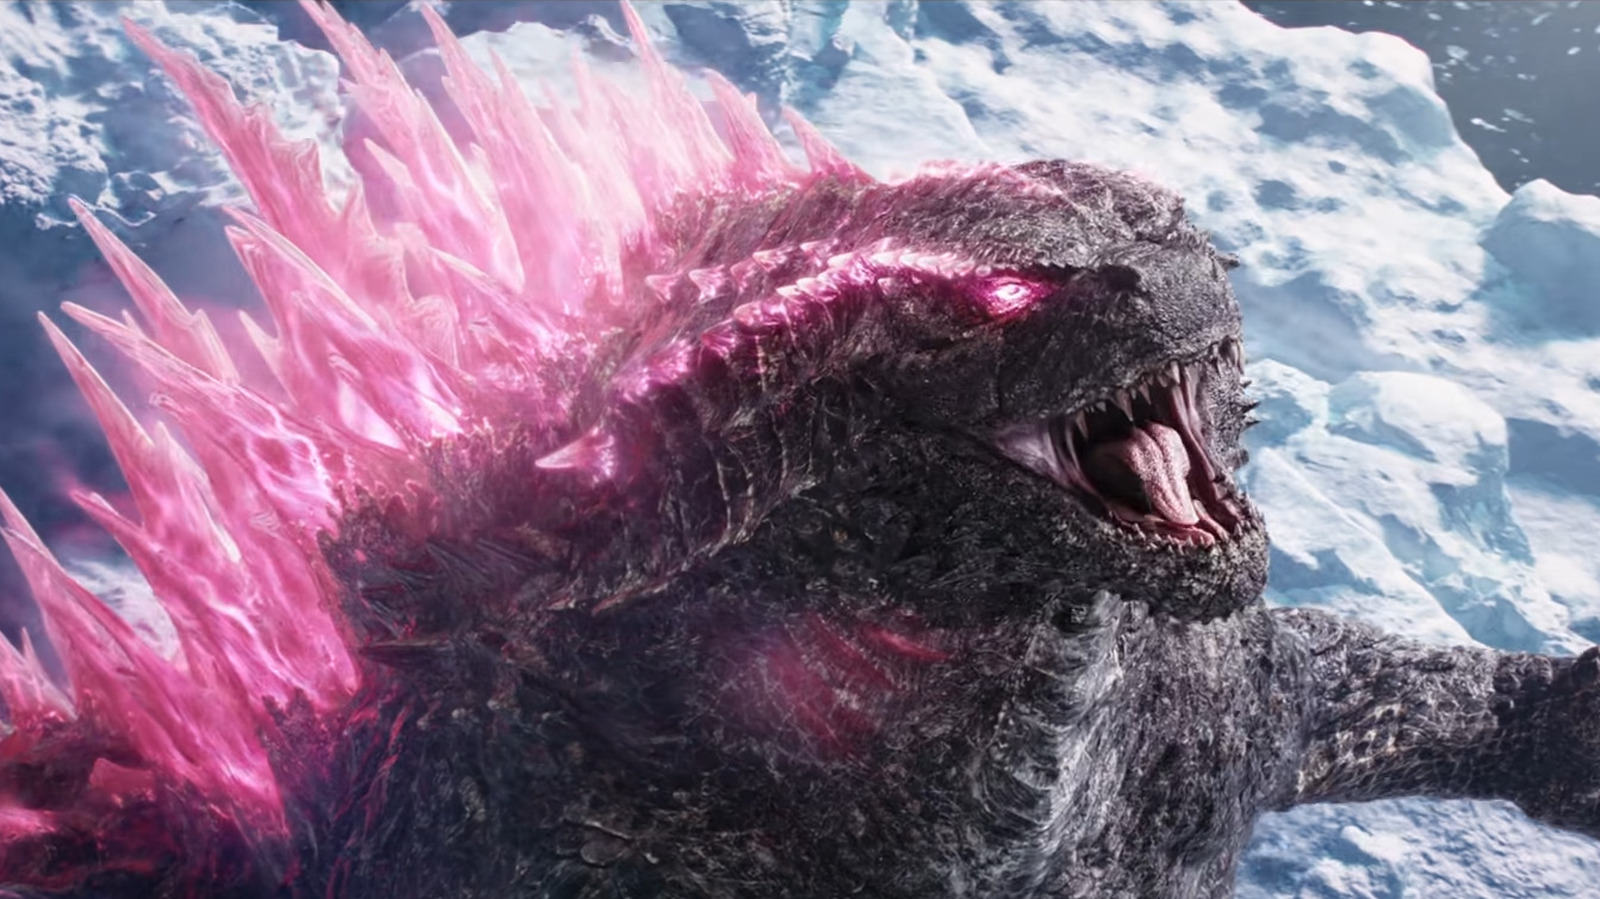 Why Is Godzilla Pink 5 Theories Why Gojira's Power Looks Different In